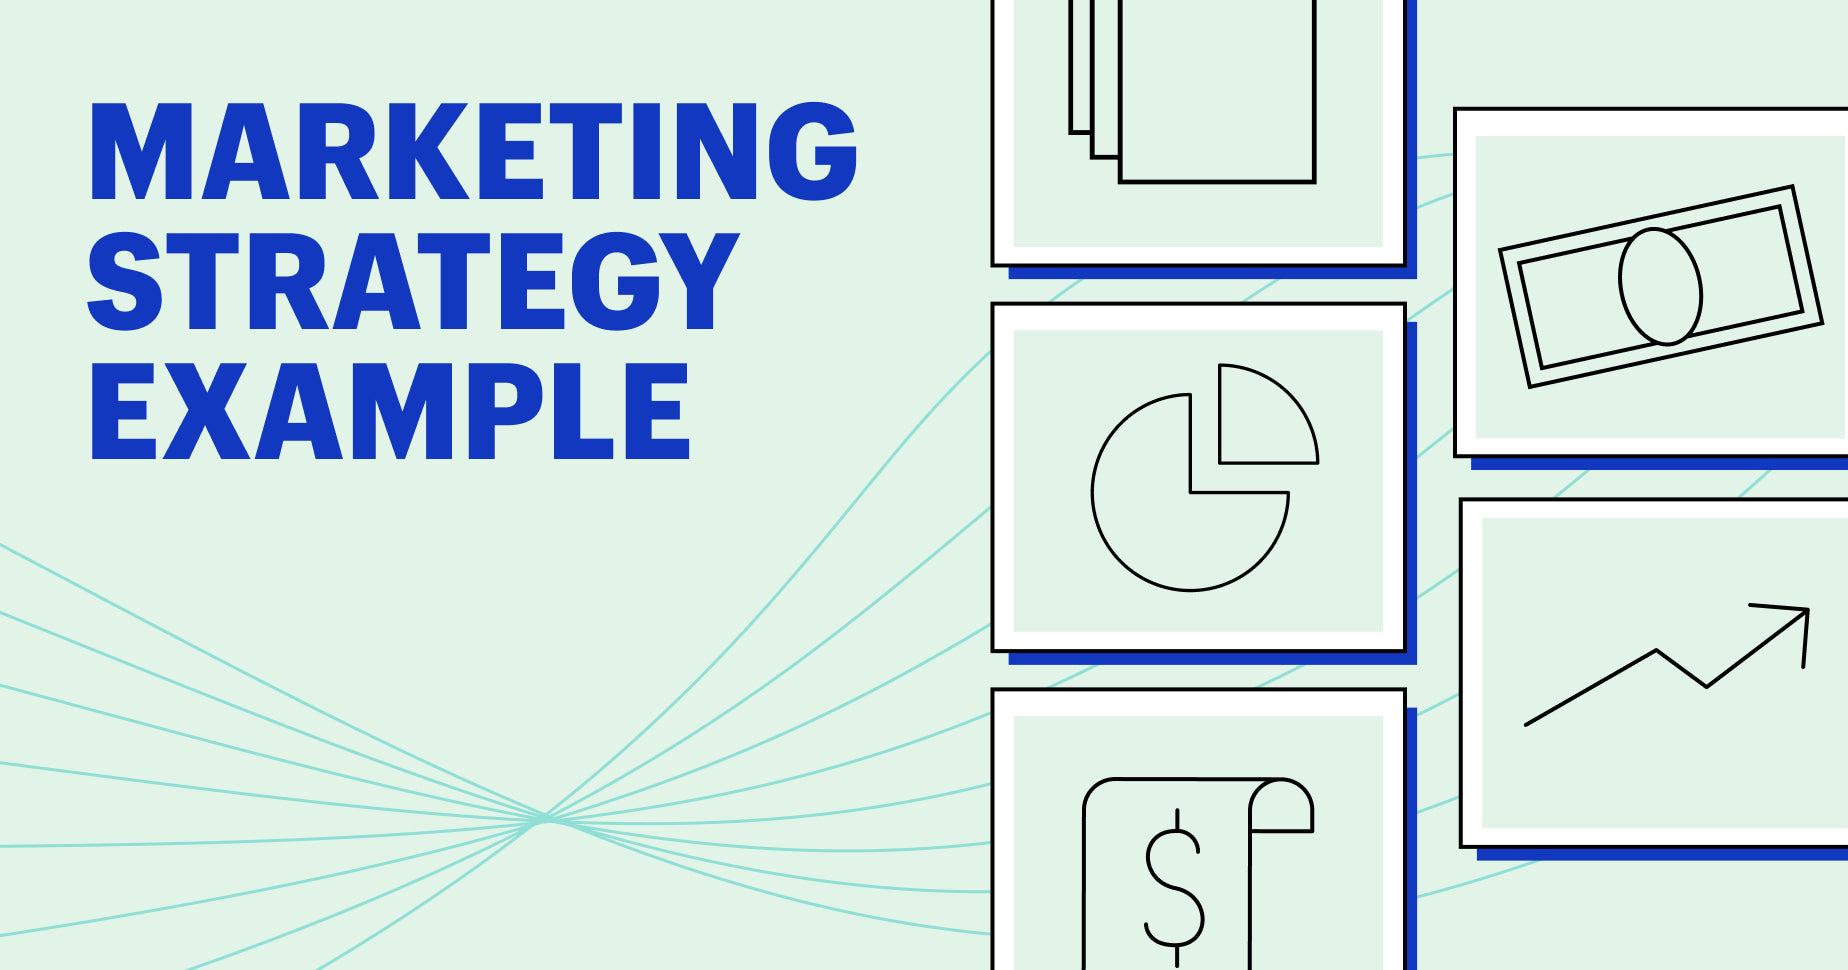 a light green graphic with blue text that says "marketing strategy example" and icons of charts and money